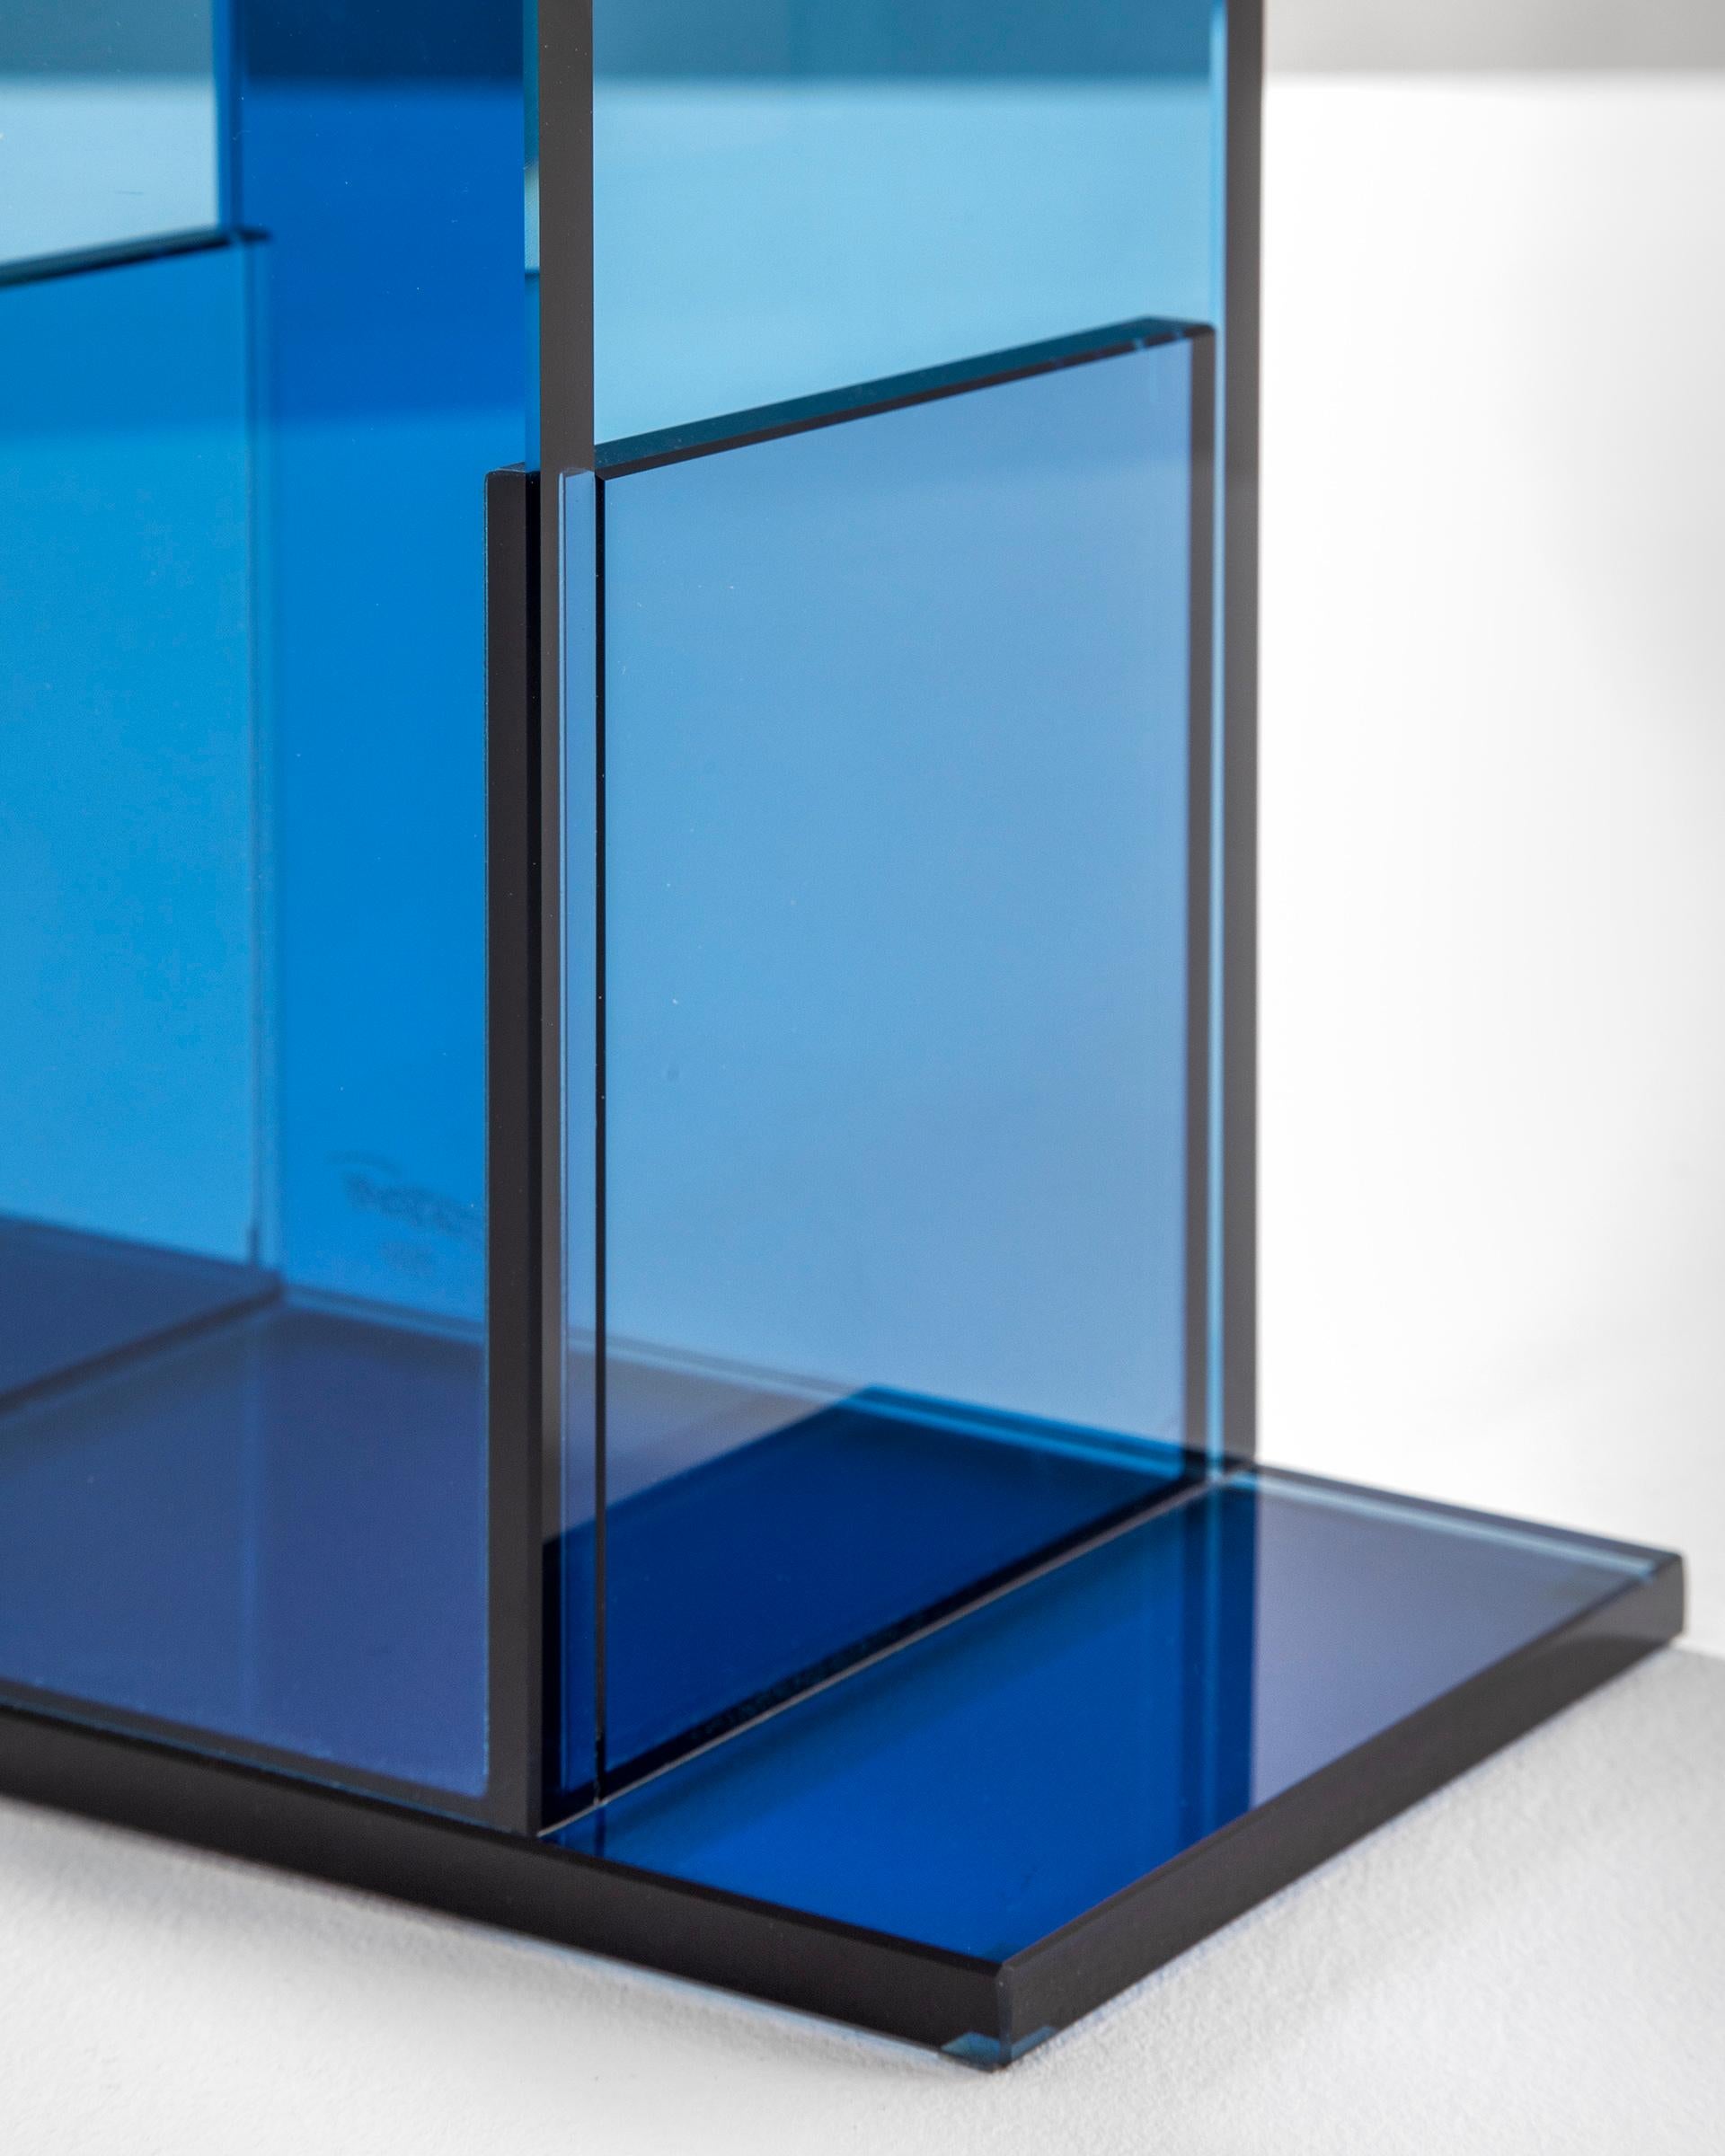 20th Century Ettore Sottsass RSVP Centerpiece Mod. Indigo in Colored Glass In Excellent Condition For Sale In Turin, Turin